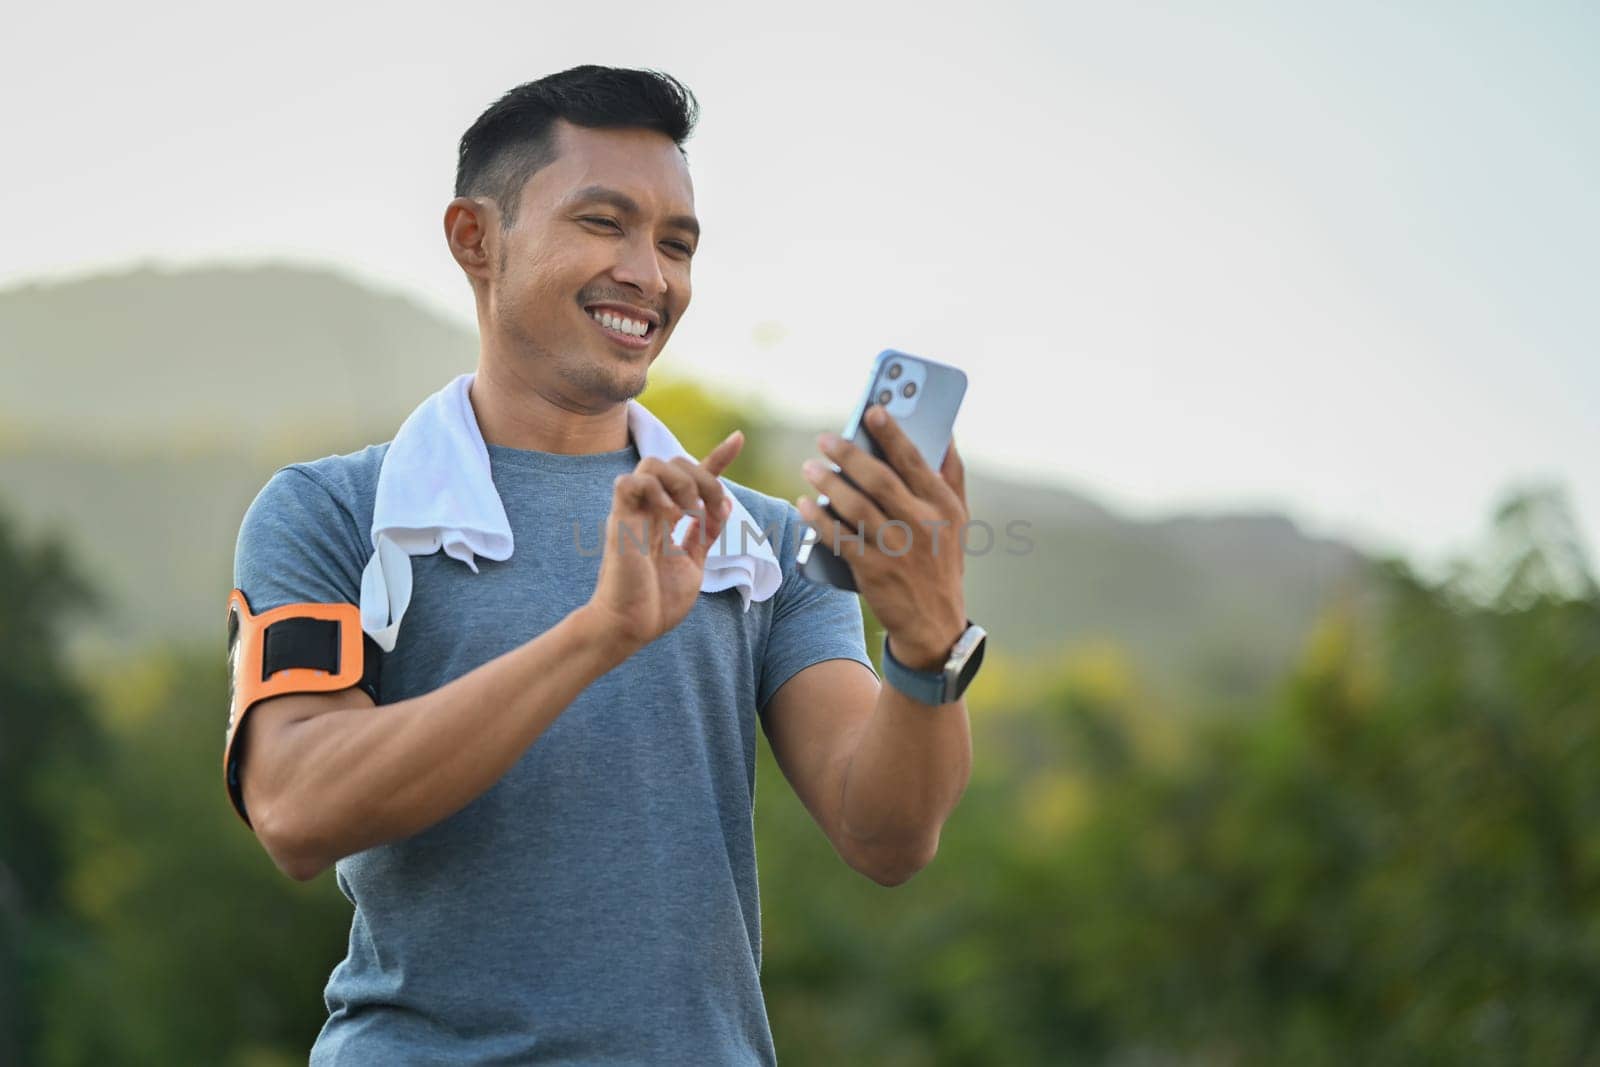 Smiling sporty man checking training results on mobile app after running in the park. Technology health and wellness concept.